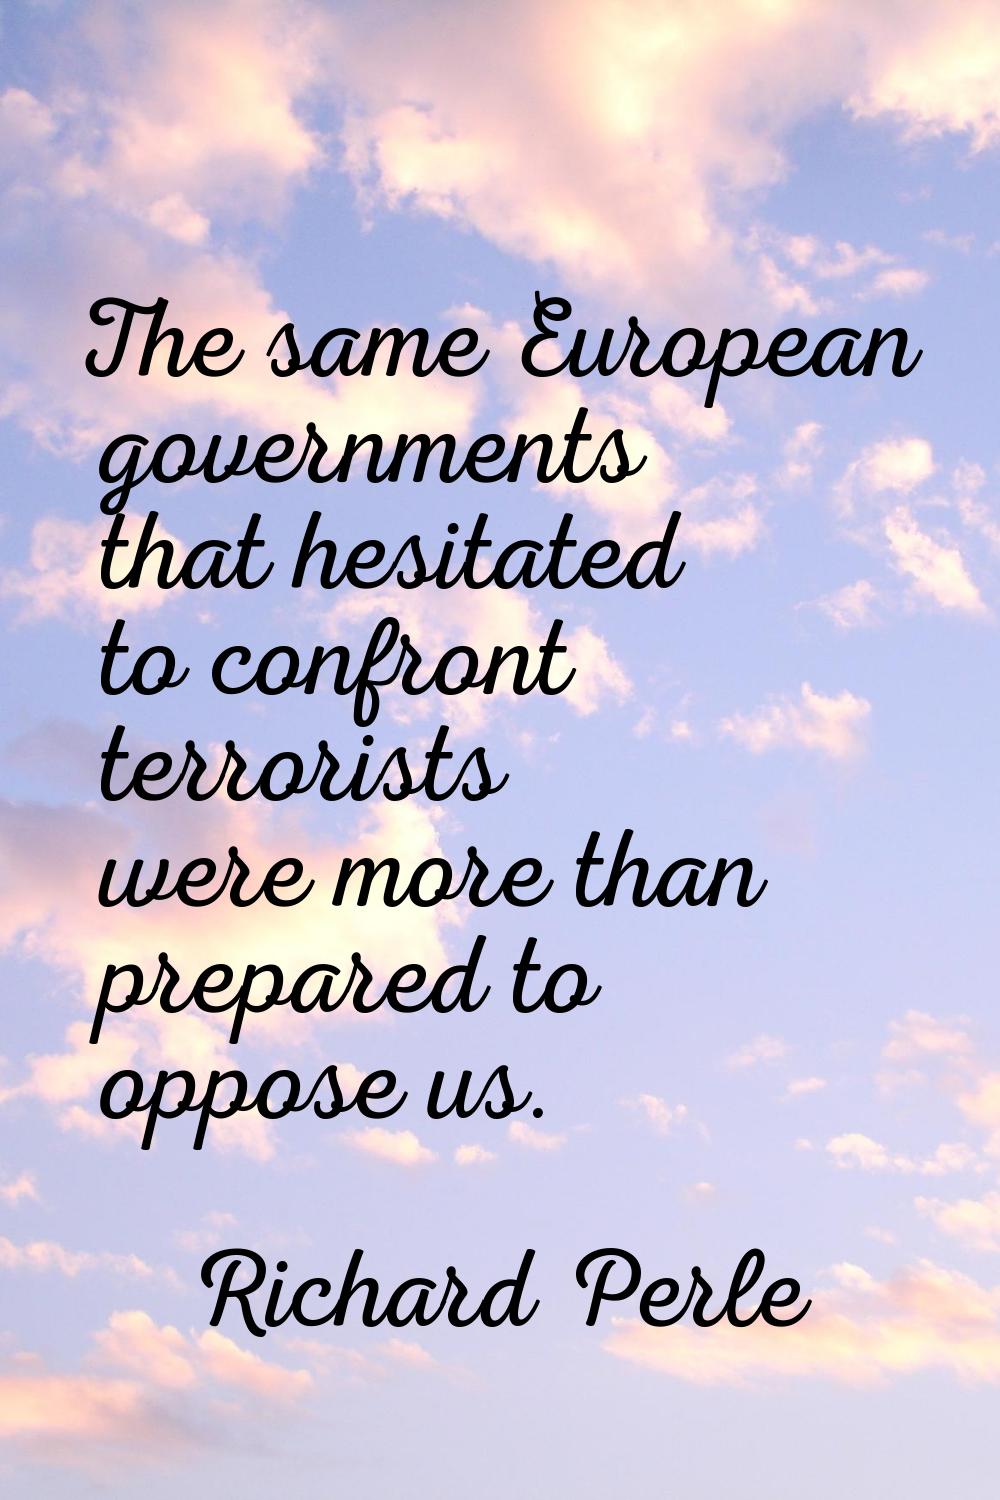 The same European governments that hesitated to confront terrorists were more than prepared to oppo